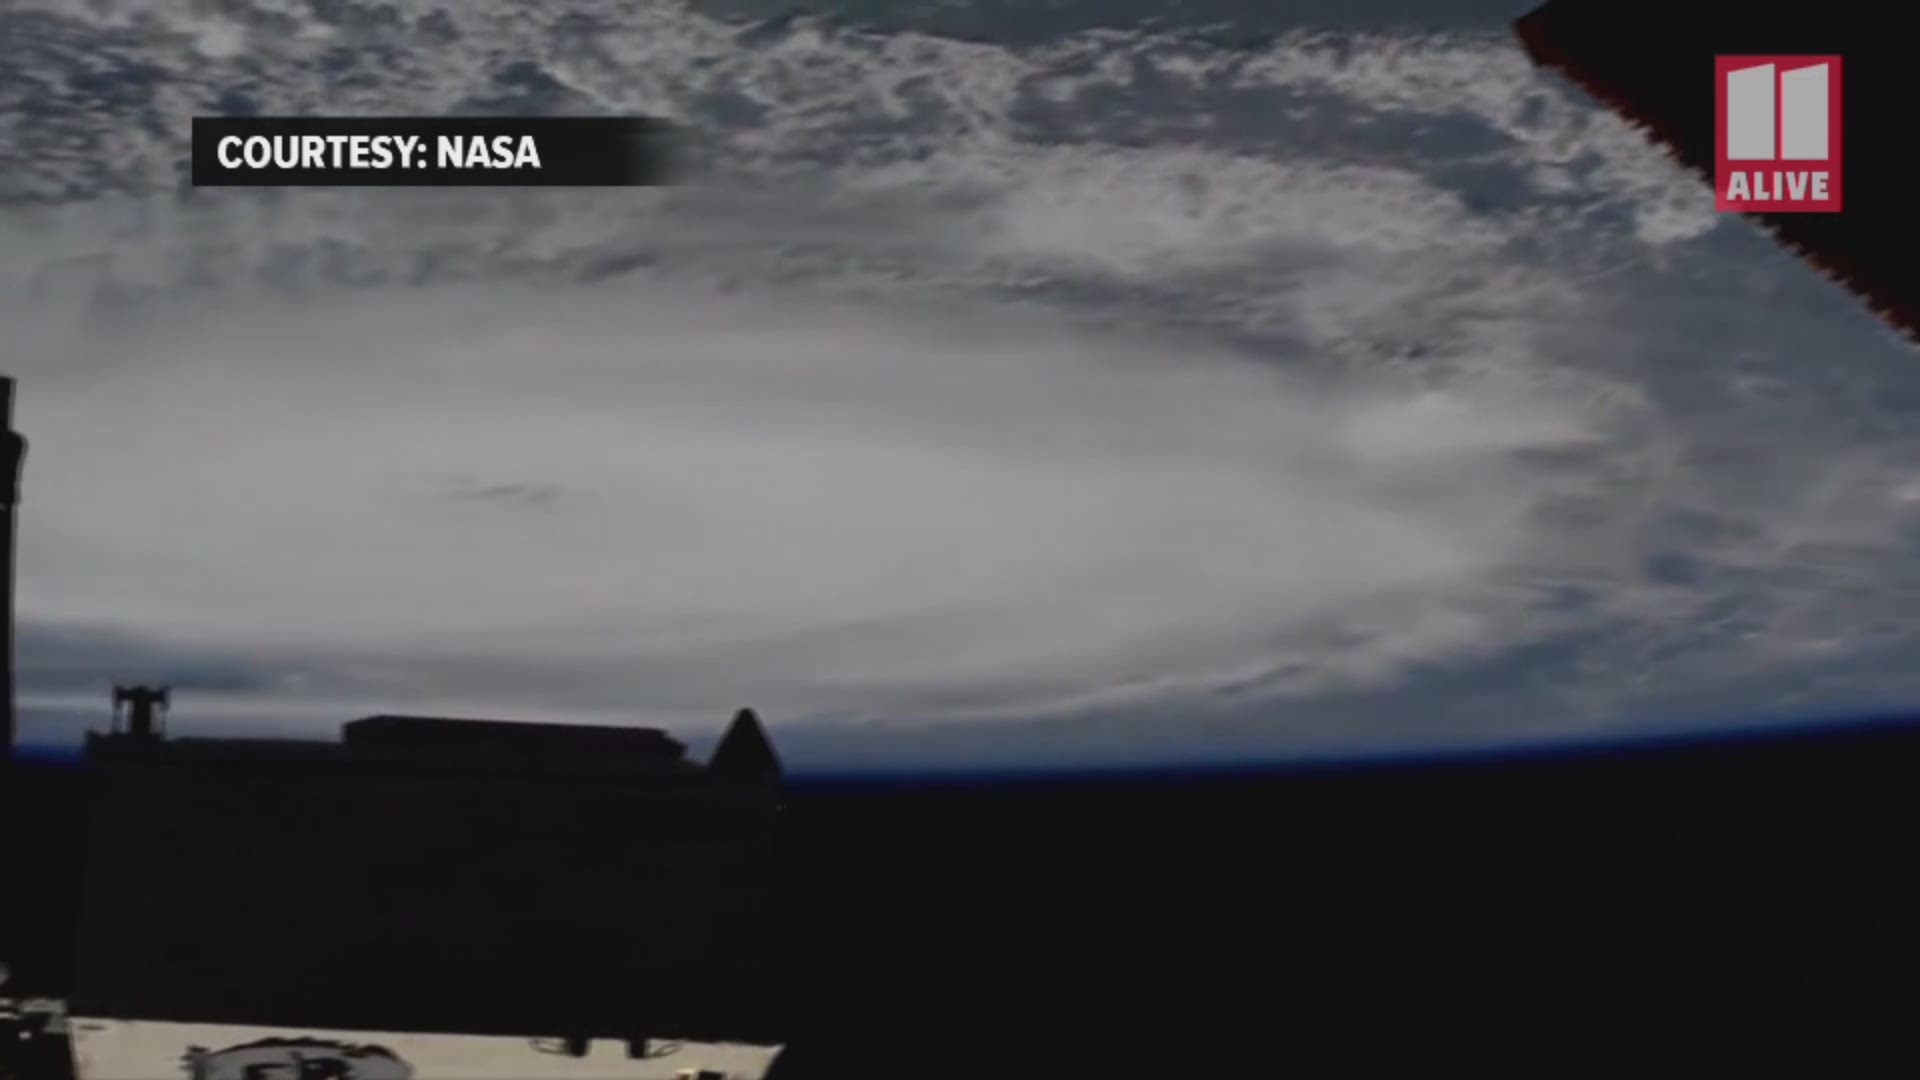 The International Space Station captured the massive storm on the surface of the earth from space.